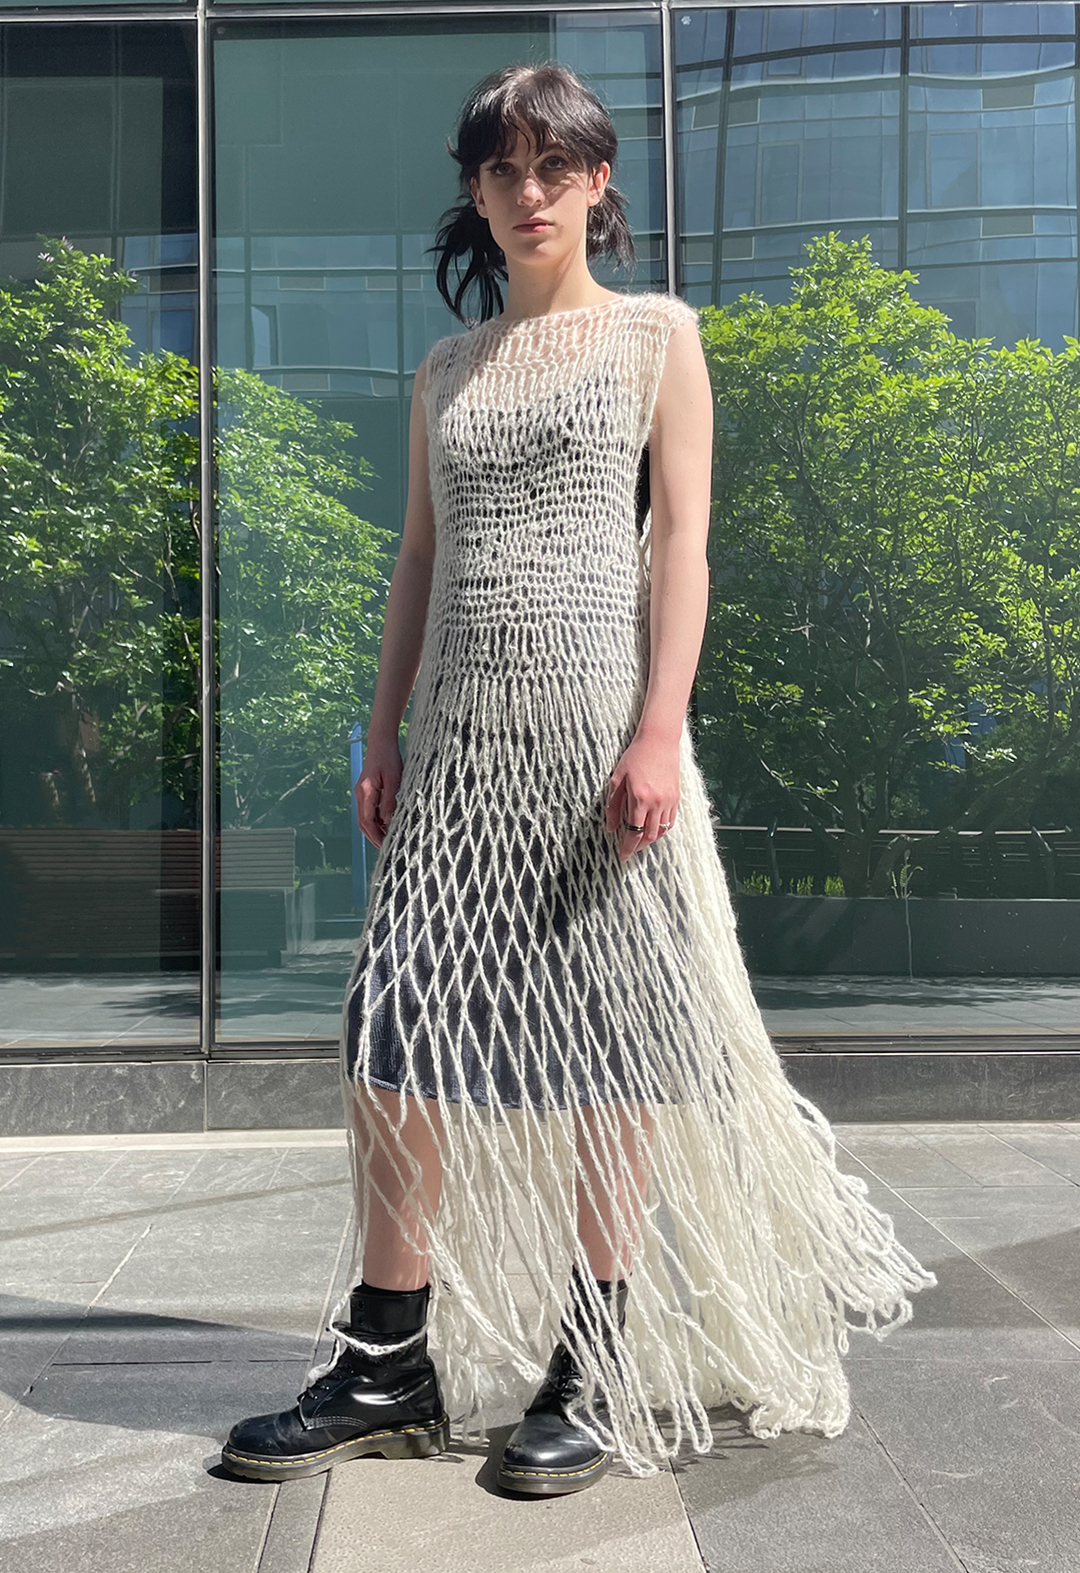 Front view of a model wearing a hand crocheted white lace suri alpaca dress. The model is wearing combat boots and there is a glass building in the background, with reflection of trees.